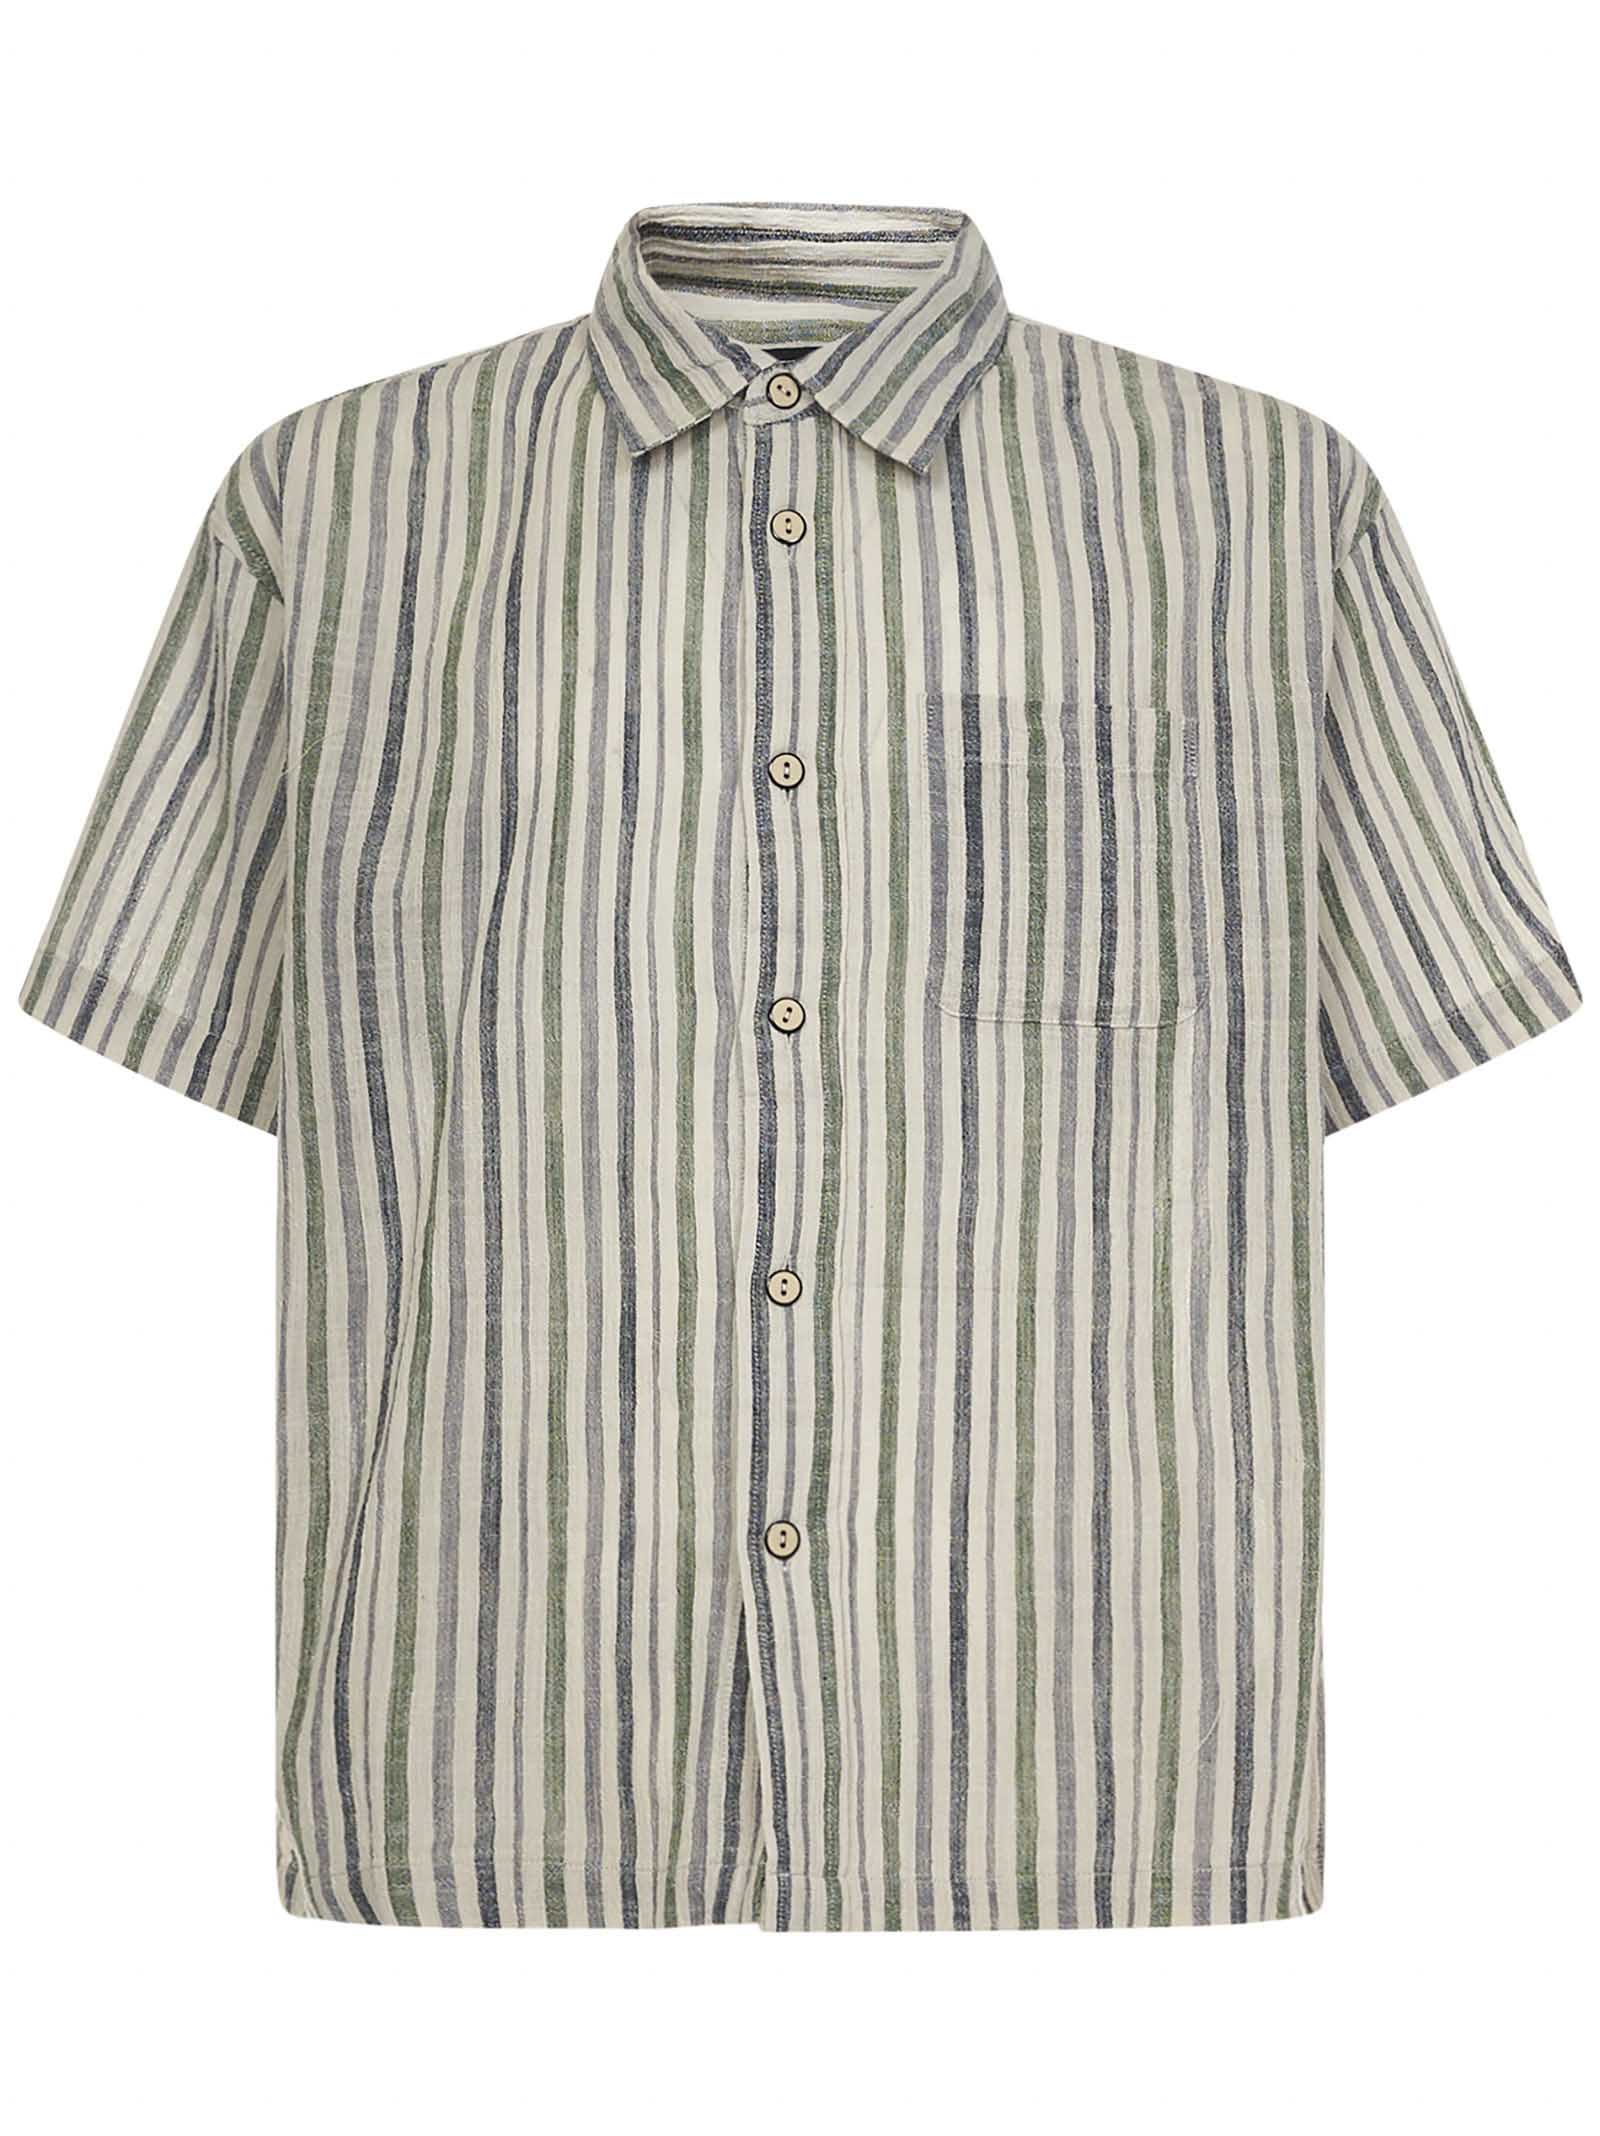 Wrinkly Cotton Gauze Shirt In Multicolor